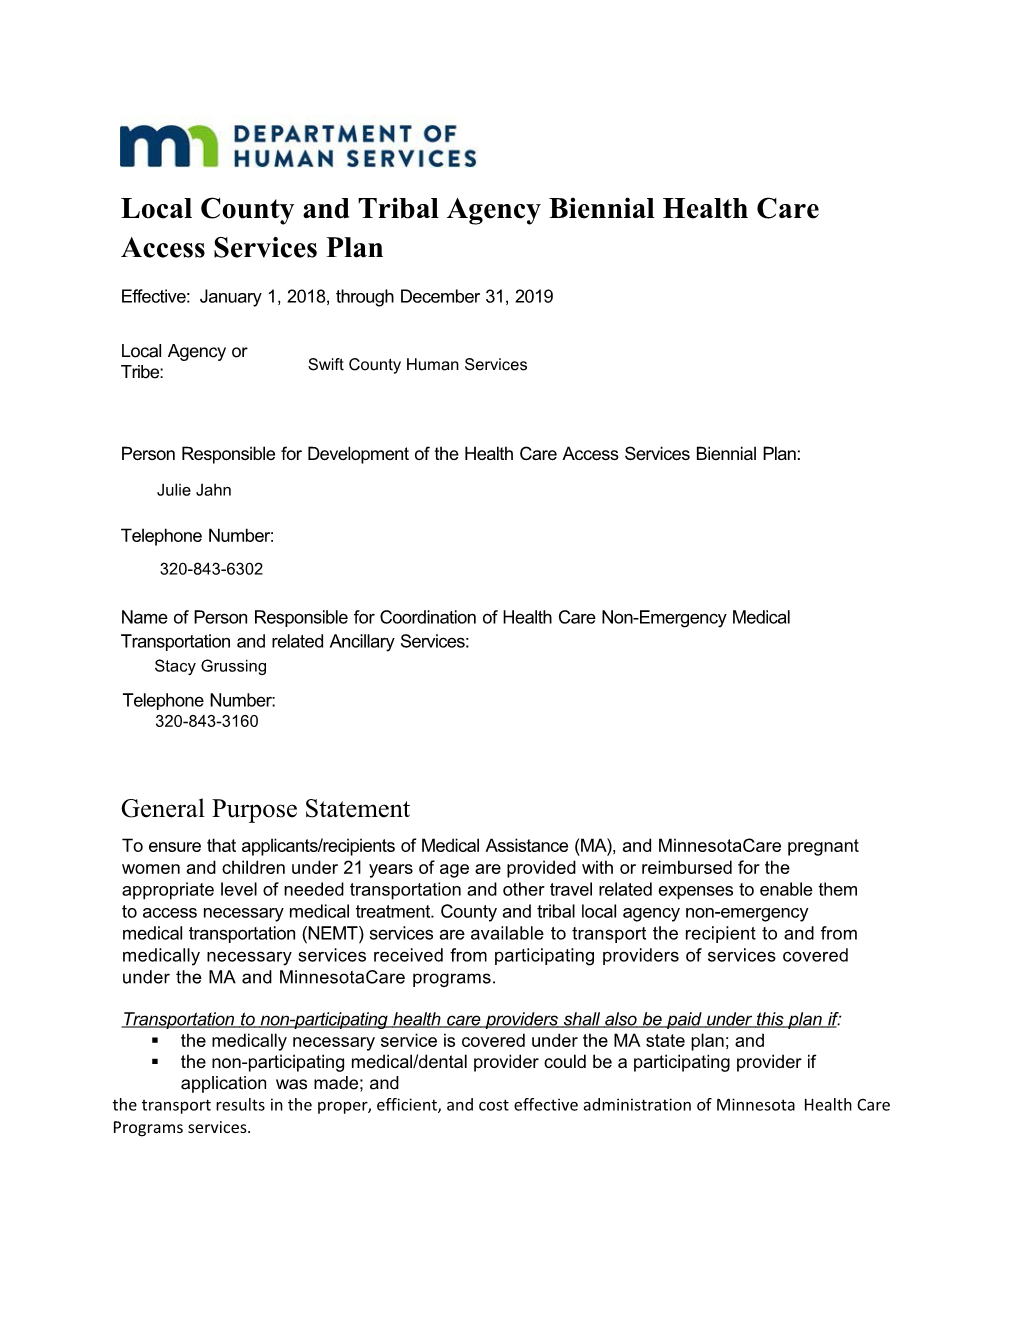 Bulletin 18-21-02 DHS Requests Biennial Health Care Access Plans for Calendar Years 2018